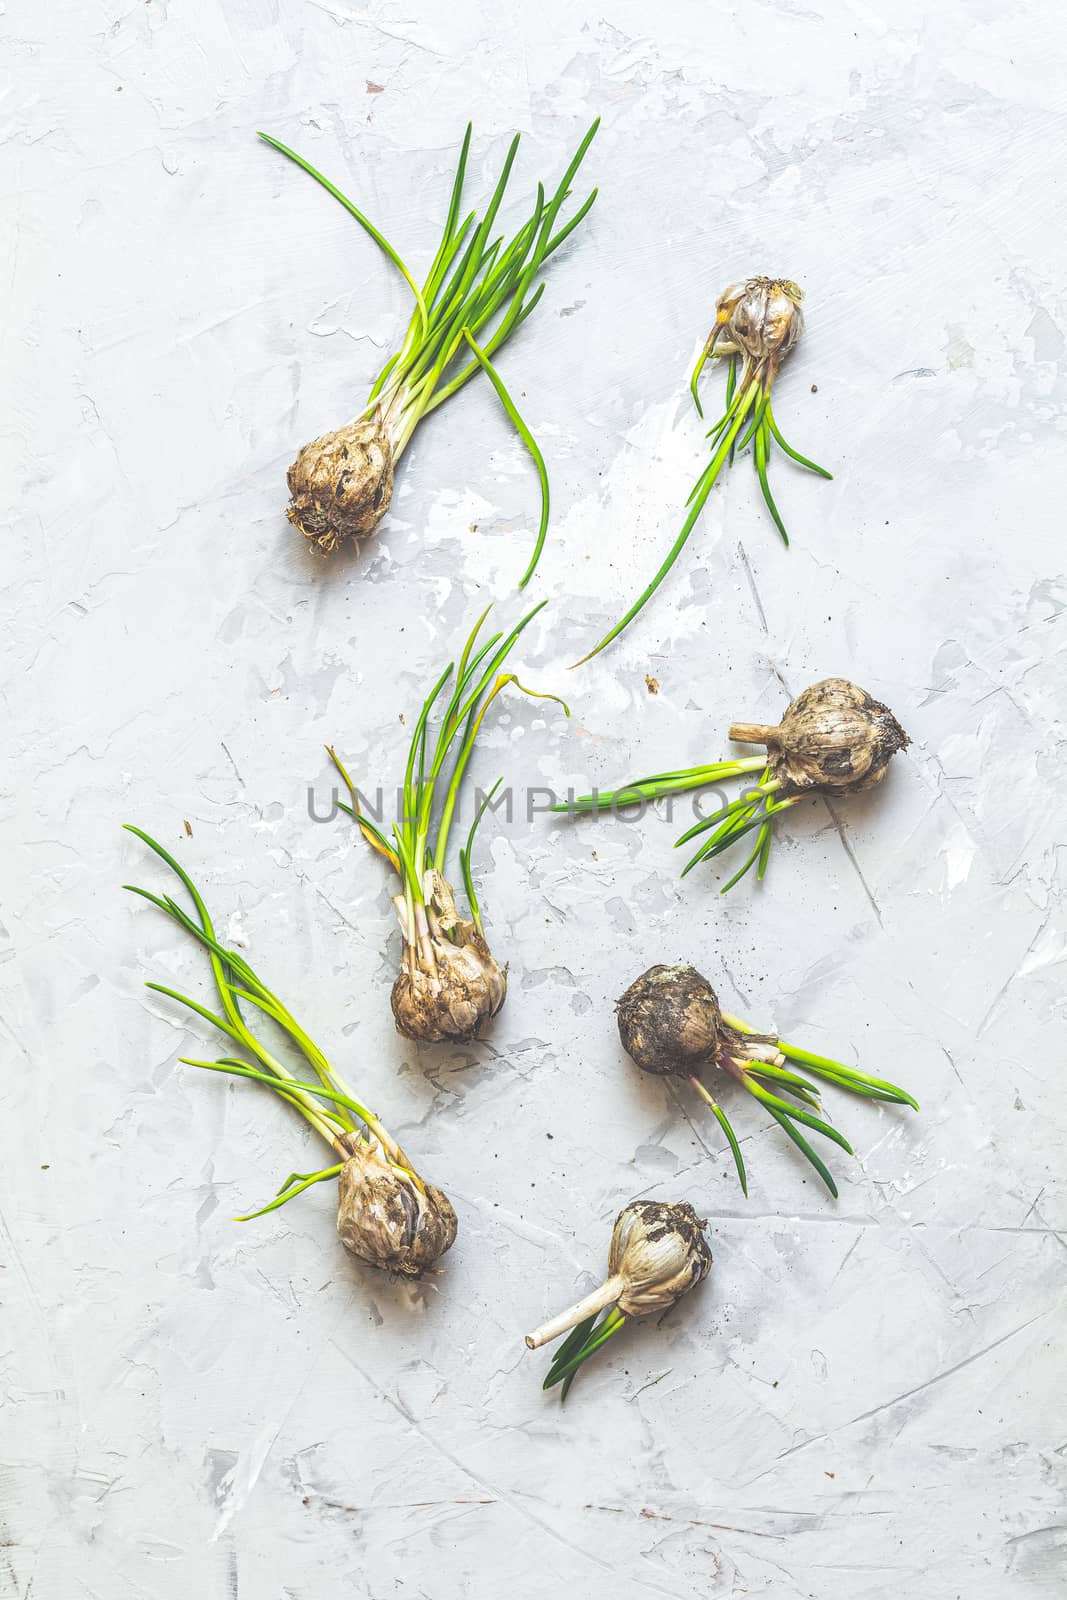 Many heads of garlic with green sprouts lie on light gray concrete table background. Top view, copy space for you text